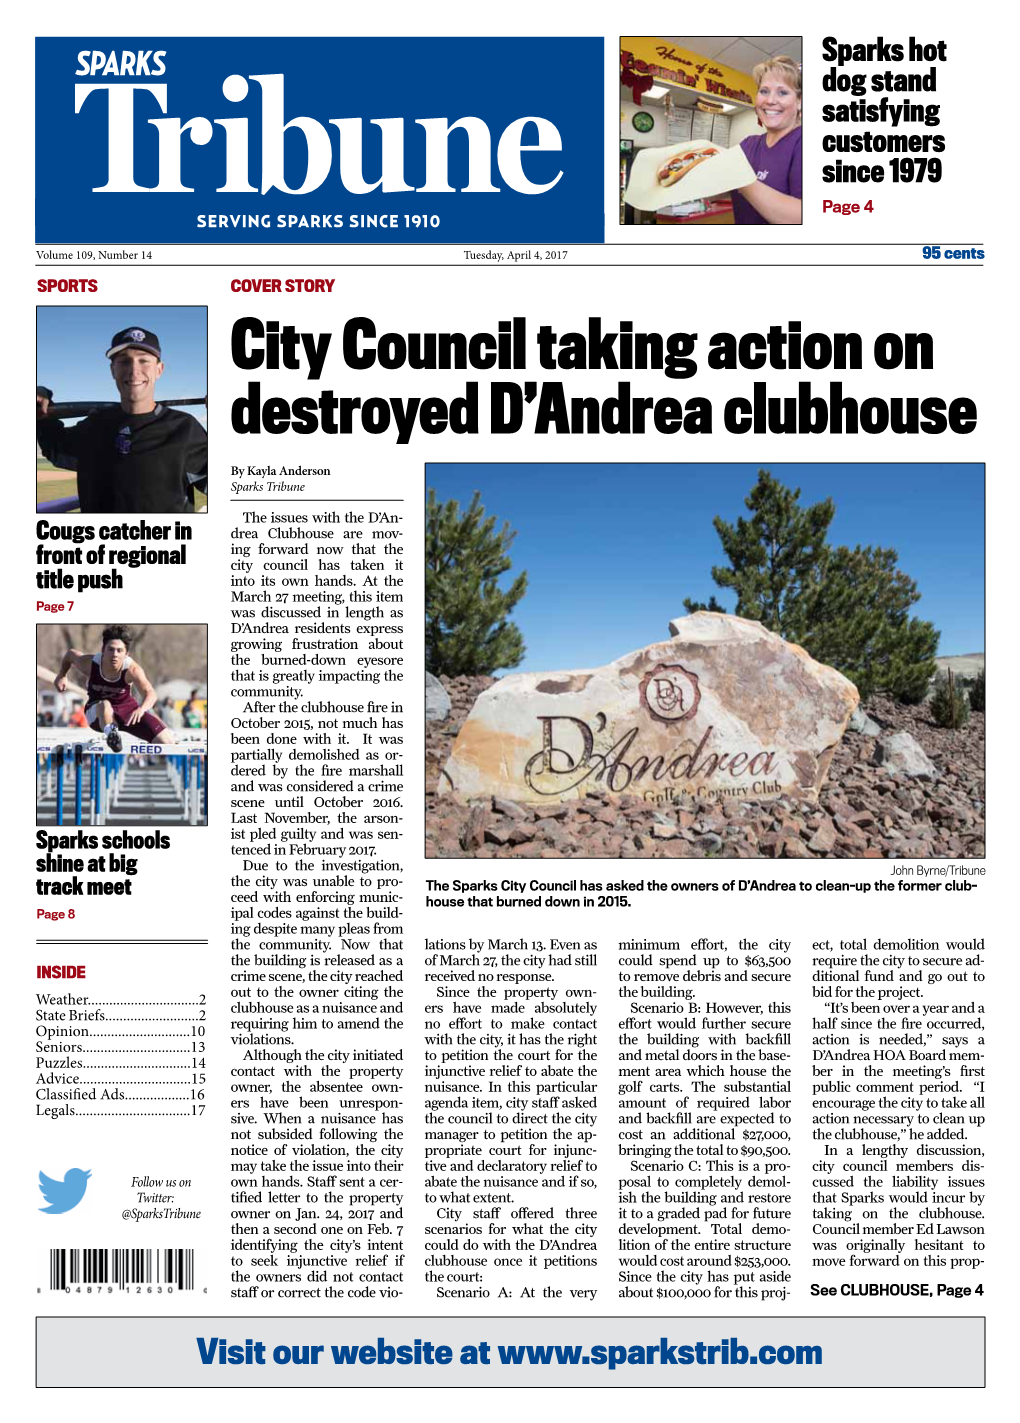 City Council Taking Action on Destroyed D'andrea Clubhouse